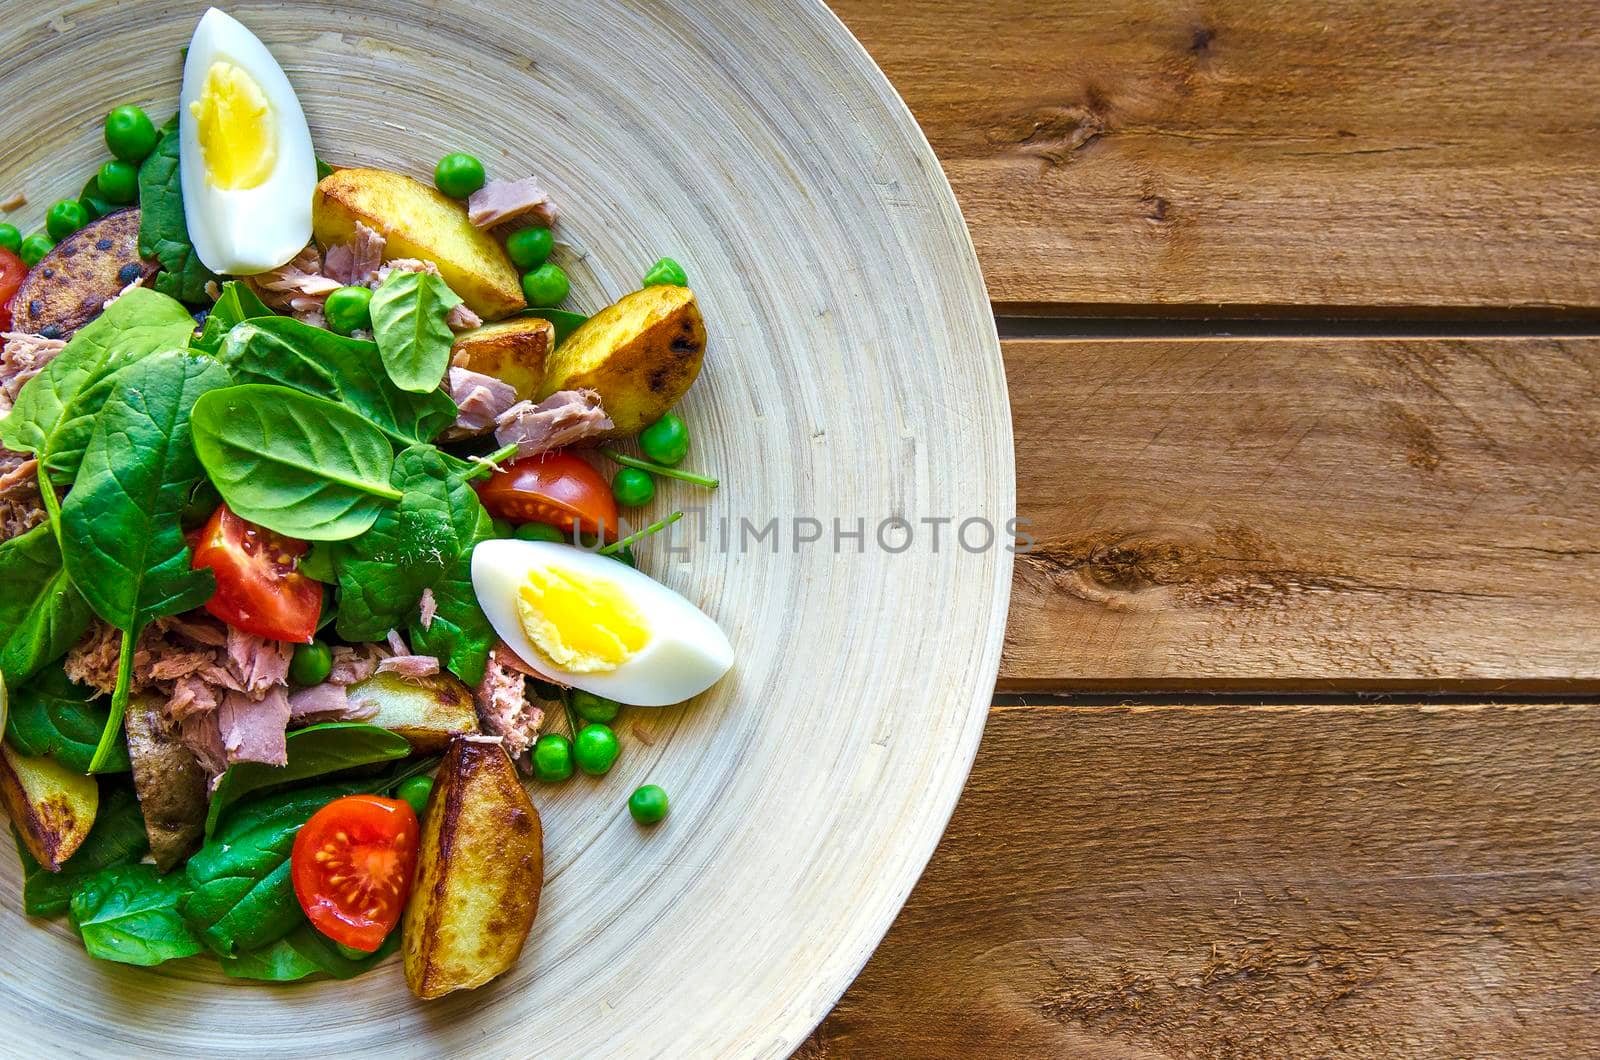 Cooking tuna salad on the wooden plate. Stock image.